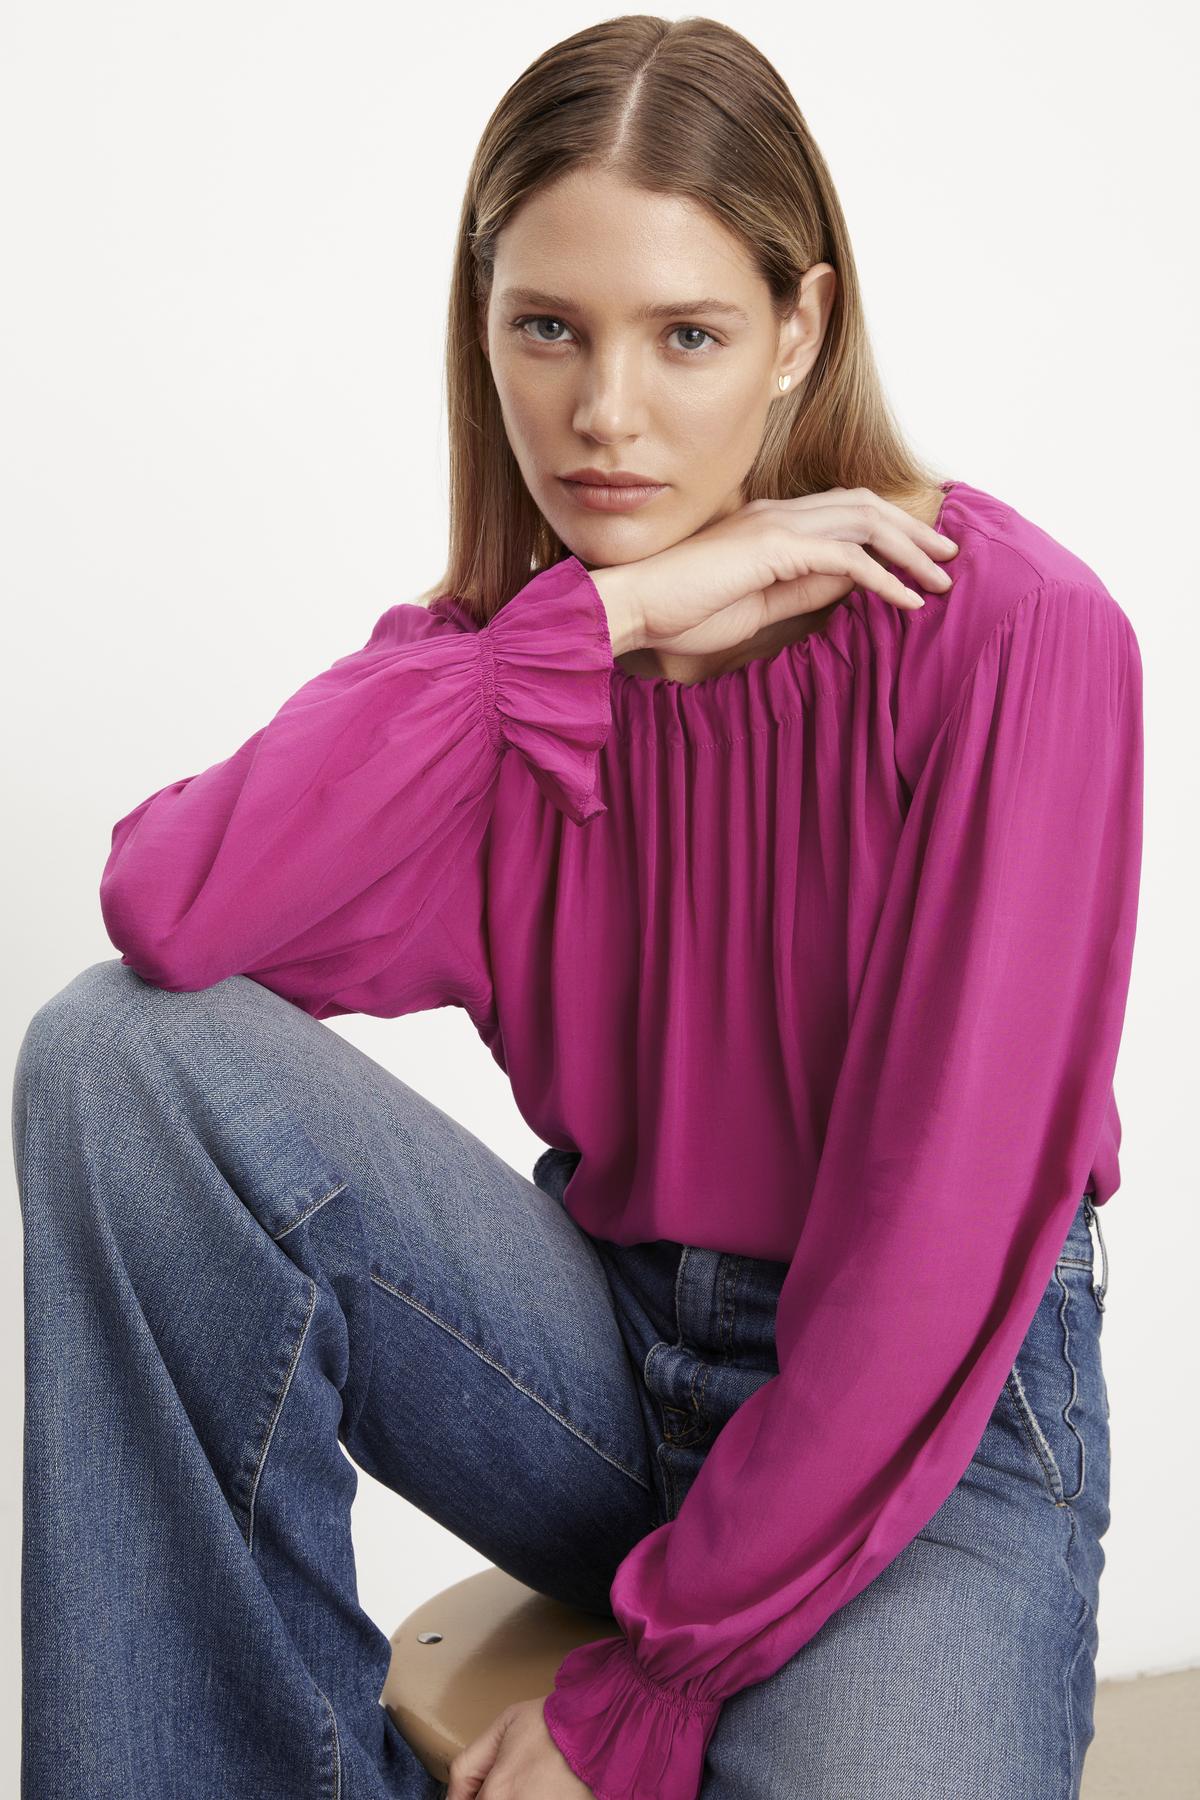 The model is wearing a luxurious Velvet by Graham & Spencer pink Bristol Neck Tie Top made of rayon challis fabric and paired with jeans.-35655605059777